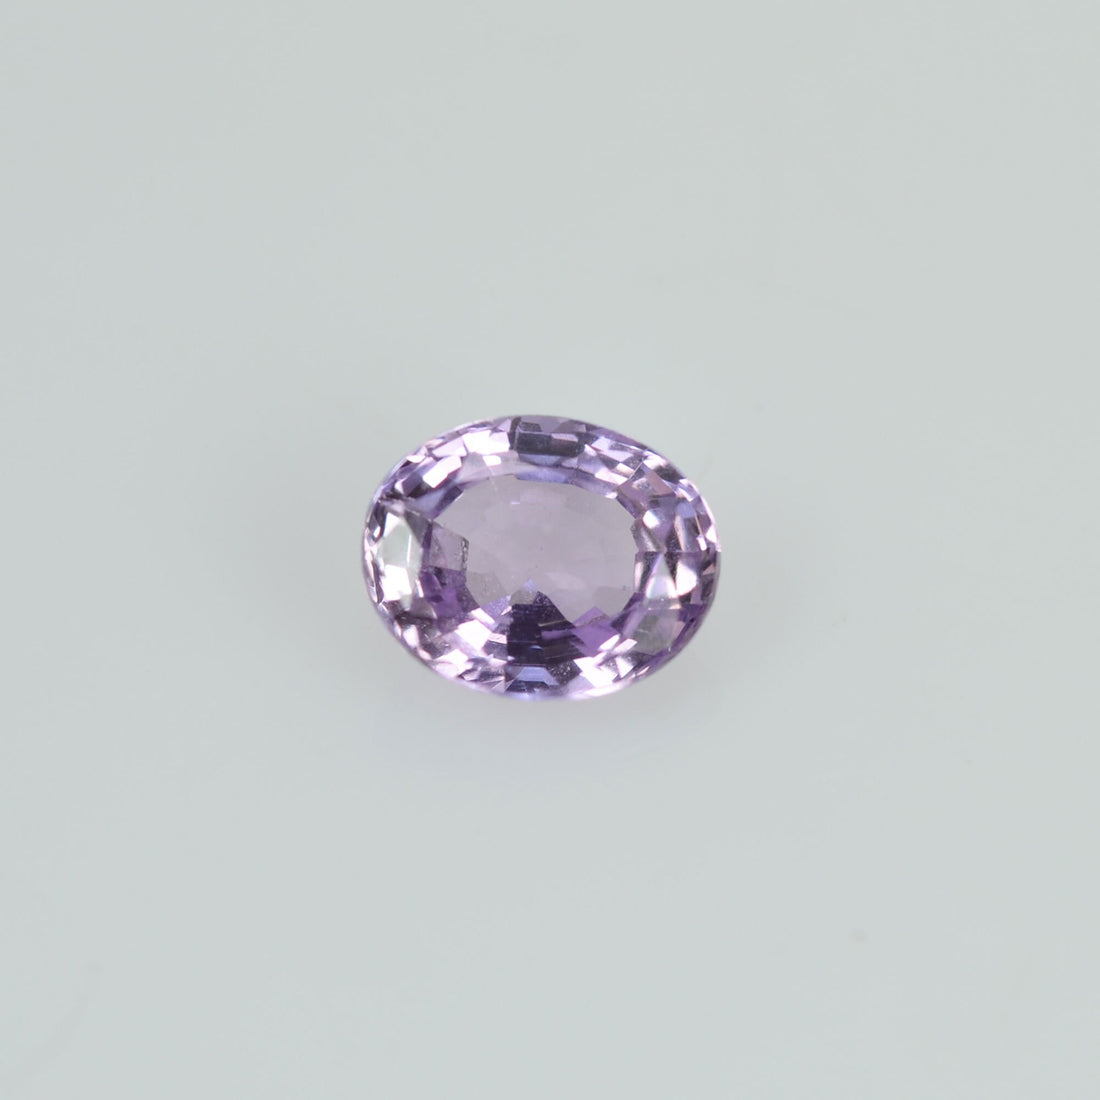 0.31 cts Natural Lavender Sapphire Loose Gemstone Oval Cut